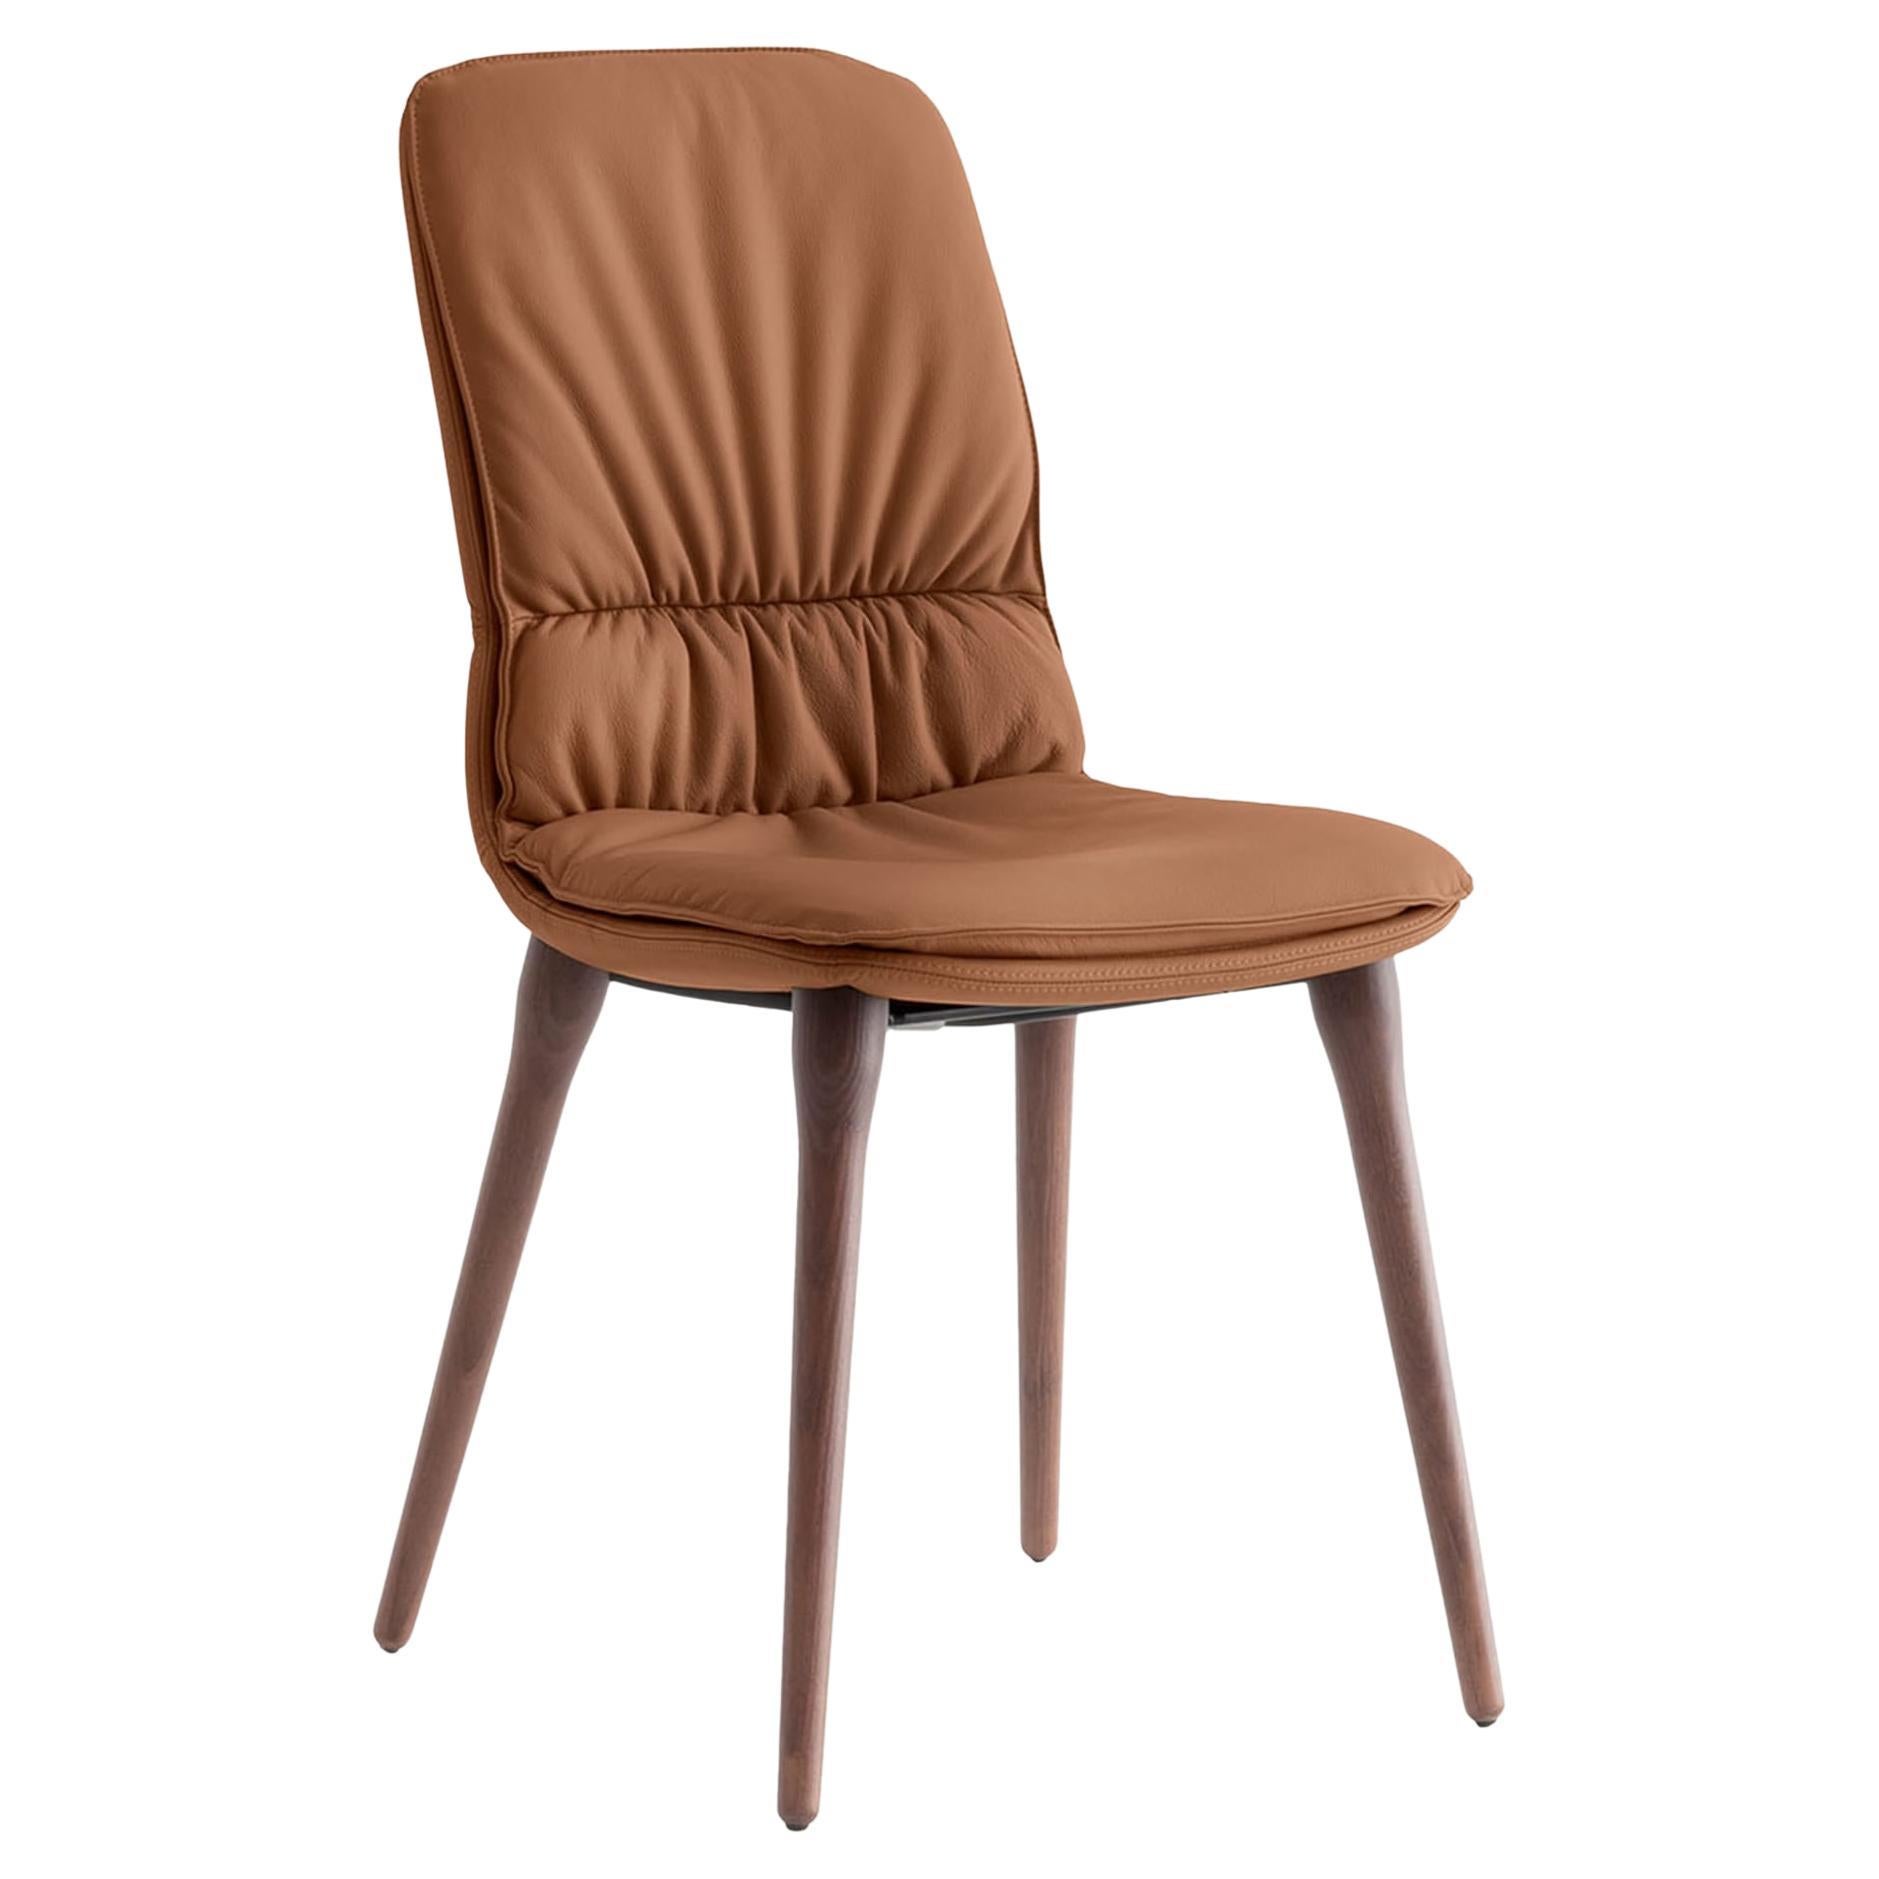 Coco Cognac-Toned Leather Chair For Sale